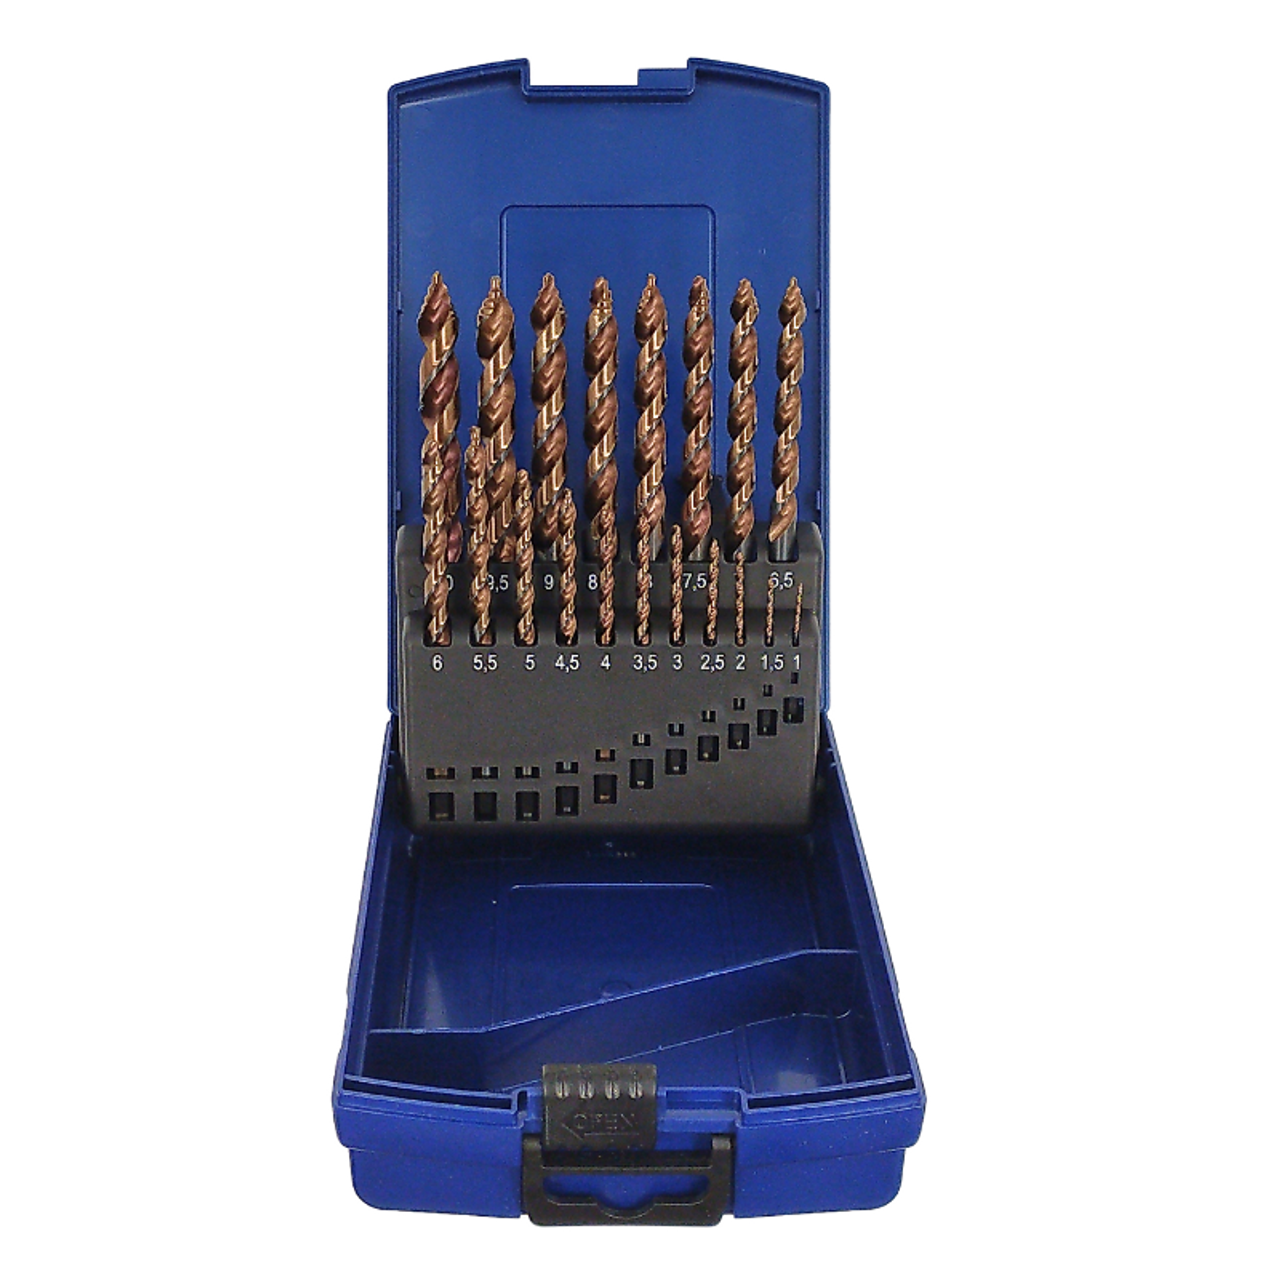 Craftsman Hardware supplies Drill Bits such as BOHRCRAFT 1203 TURBO STEP 19 pc Set ⌀1-10mm Drill Bits for Steel with HSS-E Cobalt 5% for the Carpentry Industry and Operators in Brighton, Cheltenham and Moorabin